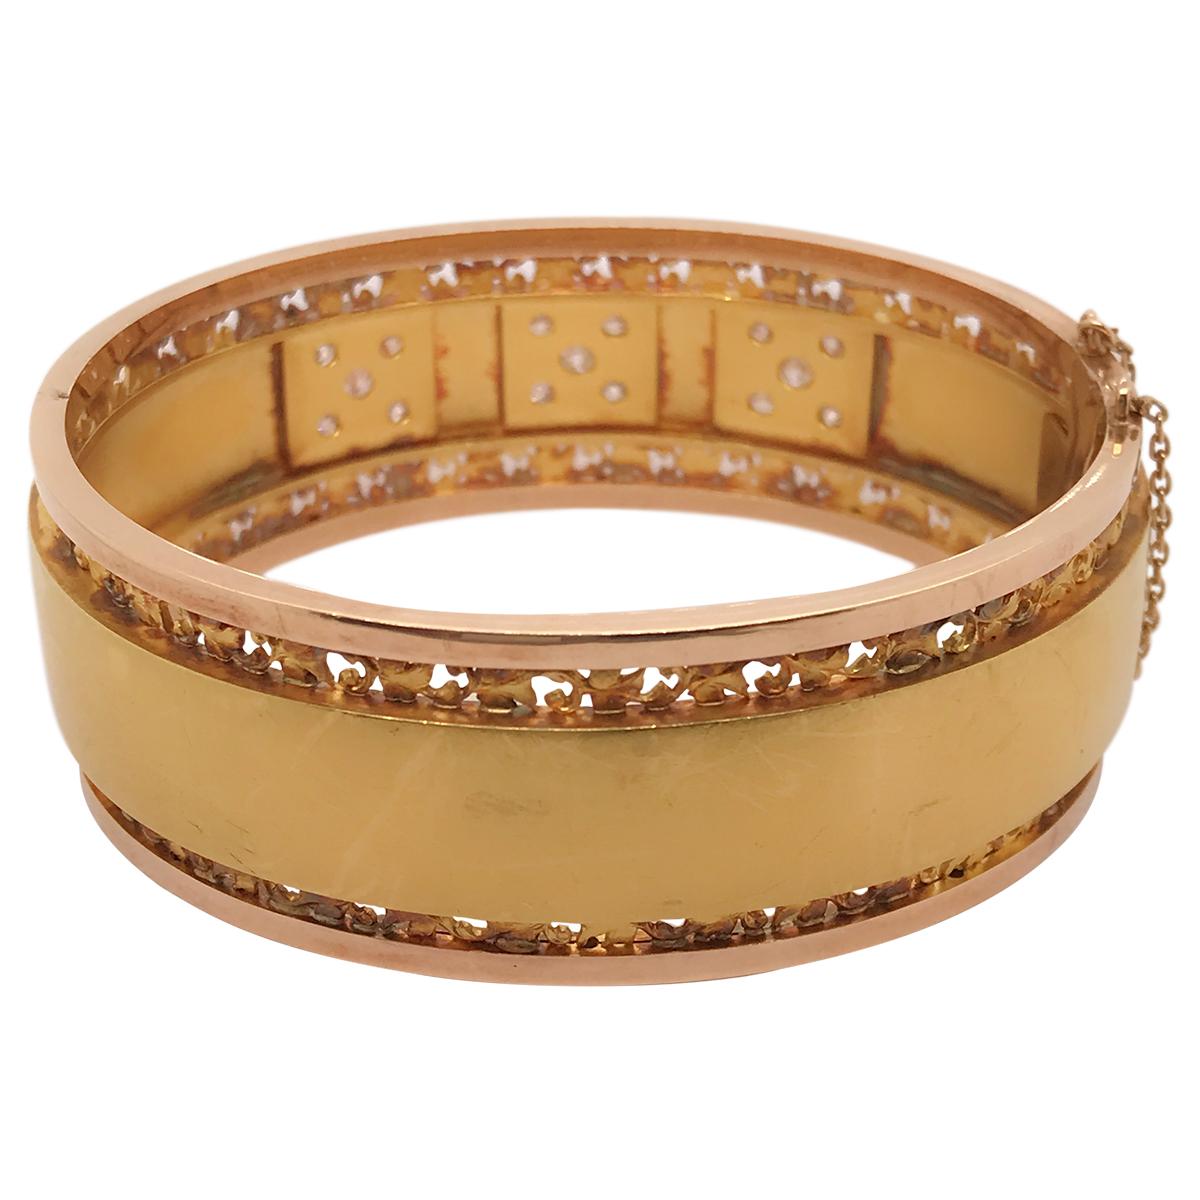 From a past era, don't you wish jewels could talk? This bangle is special in so many ways, it's French and the French always crafted the most amazing jewels. The colour of the 18k yellow gold is a standout - it's bright but not showy and it has a